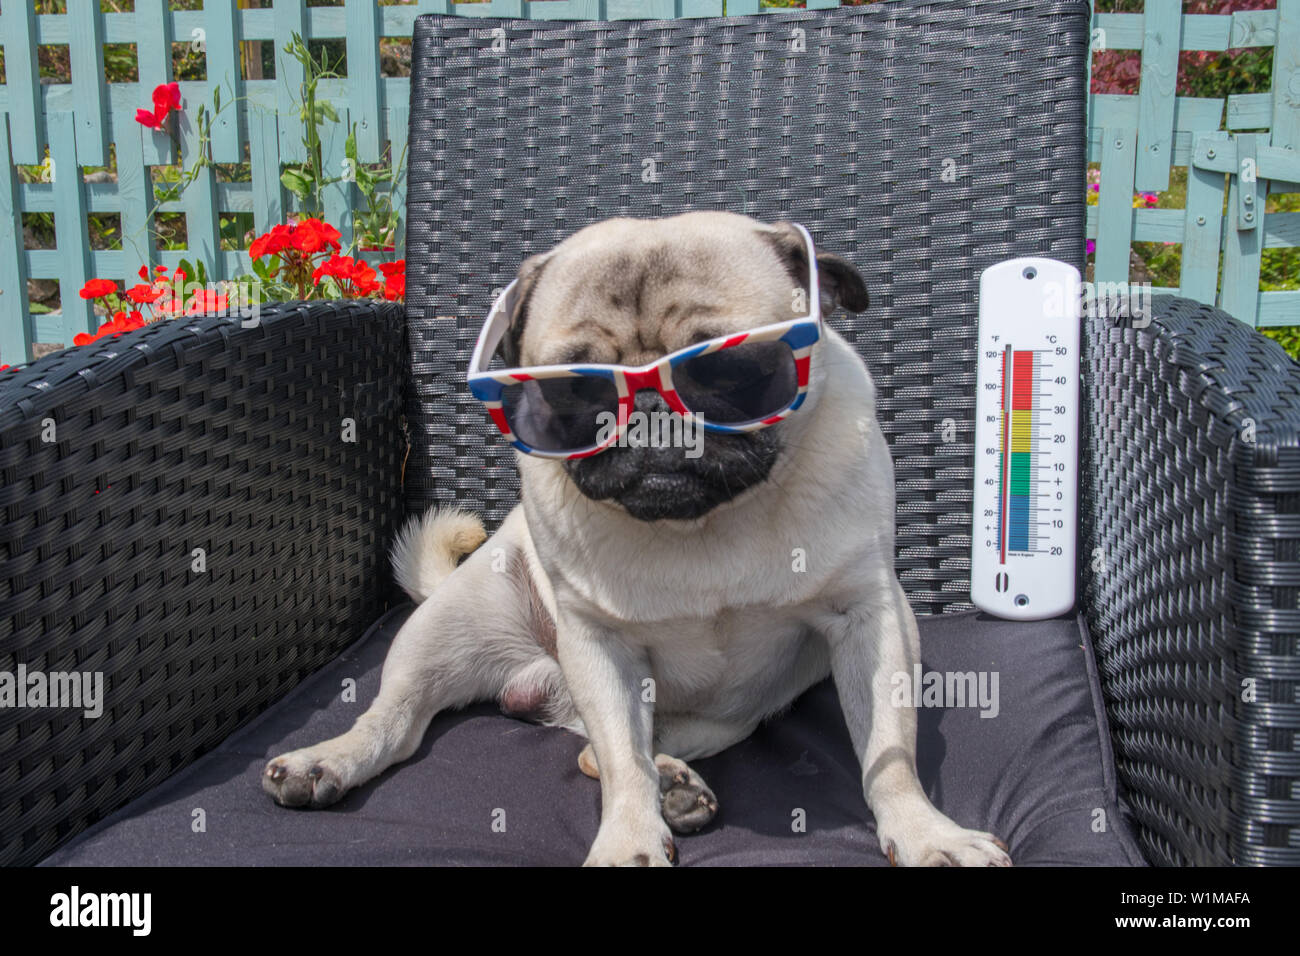 Pug Dog Sitting On Chair In Hot Weather With A Thermometer In The